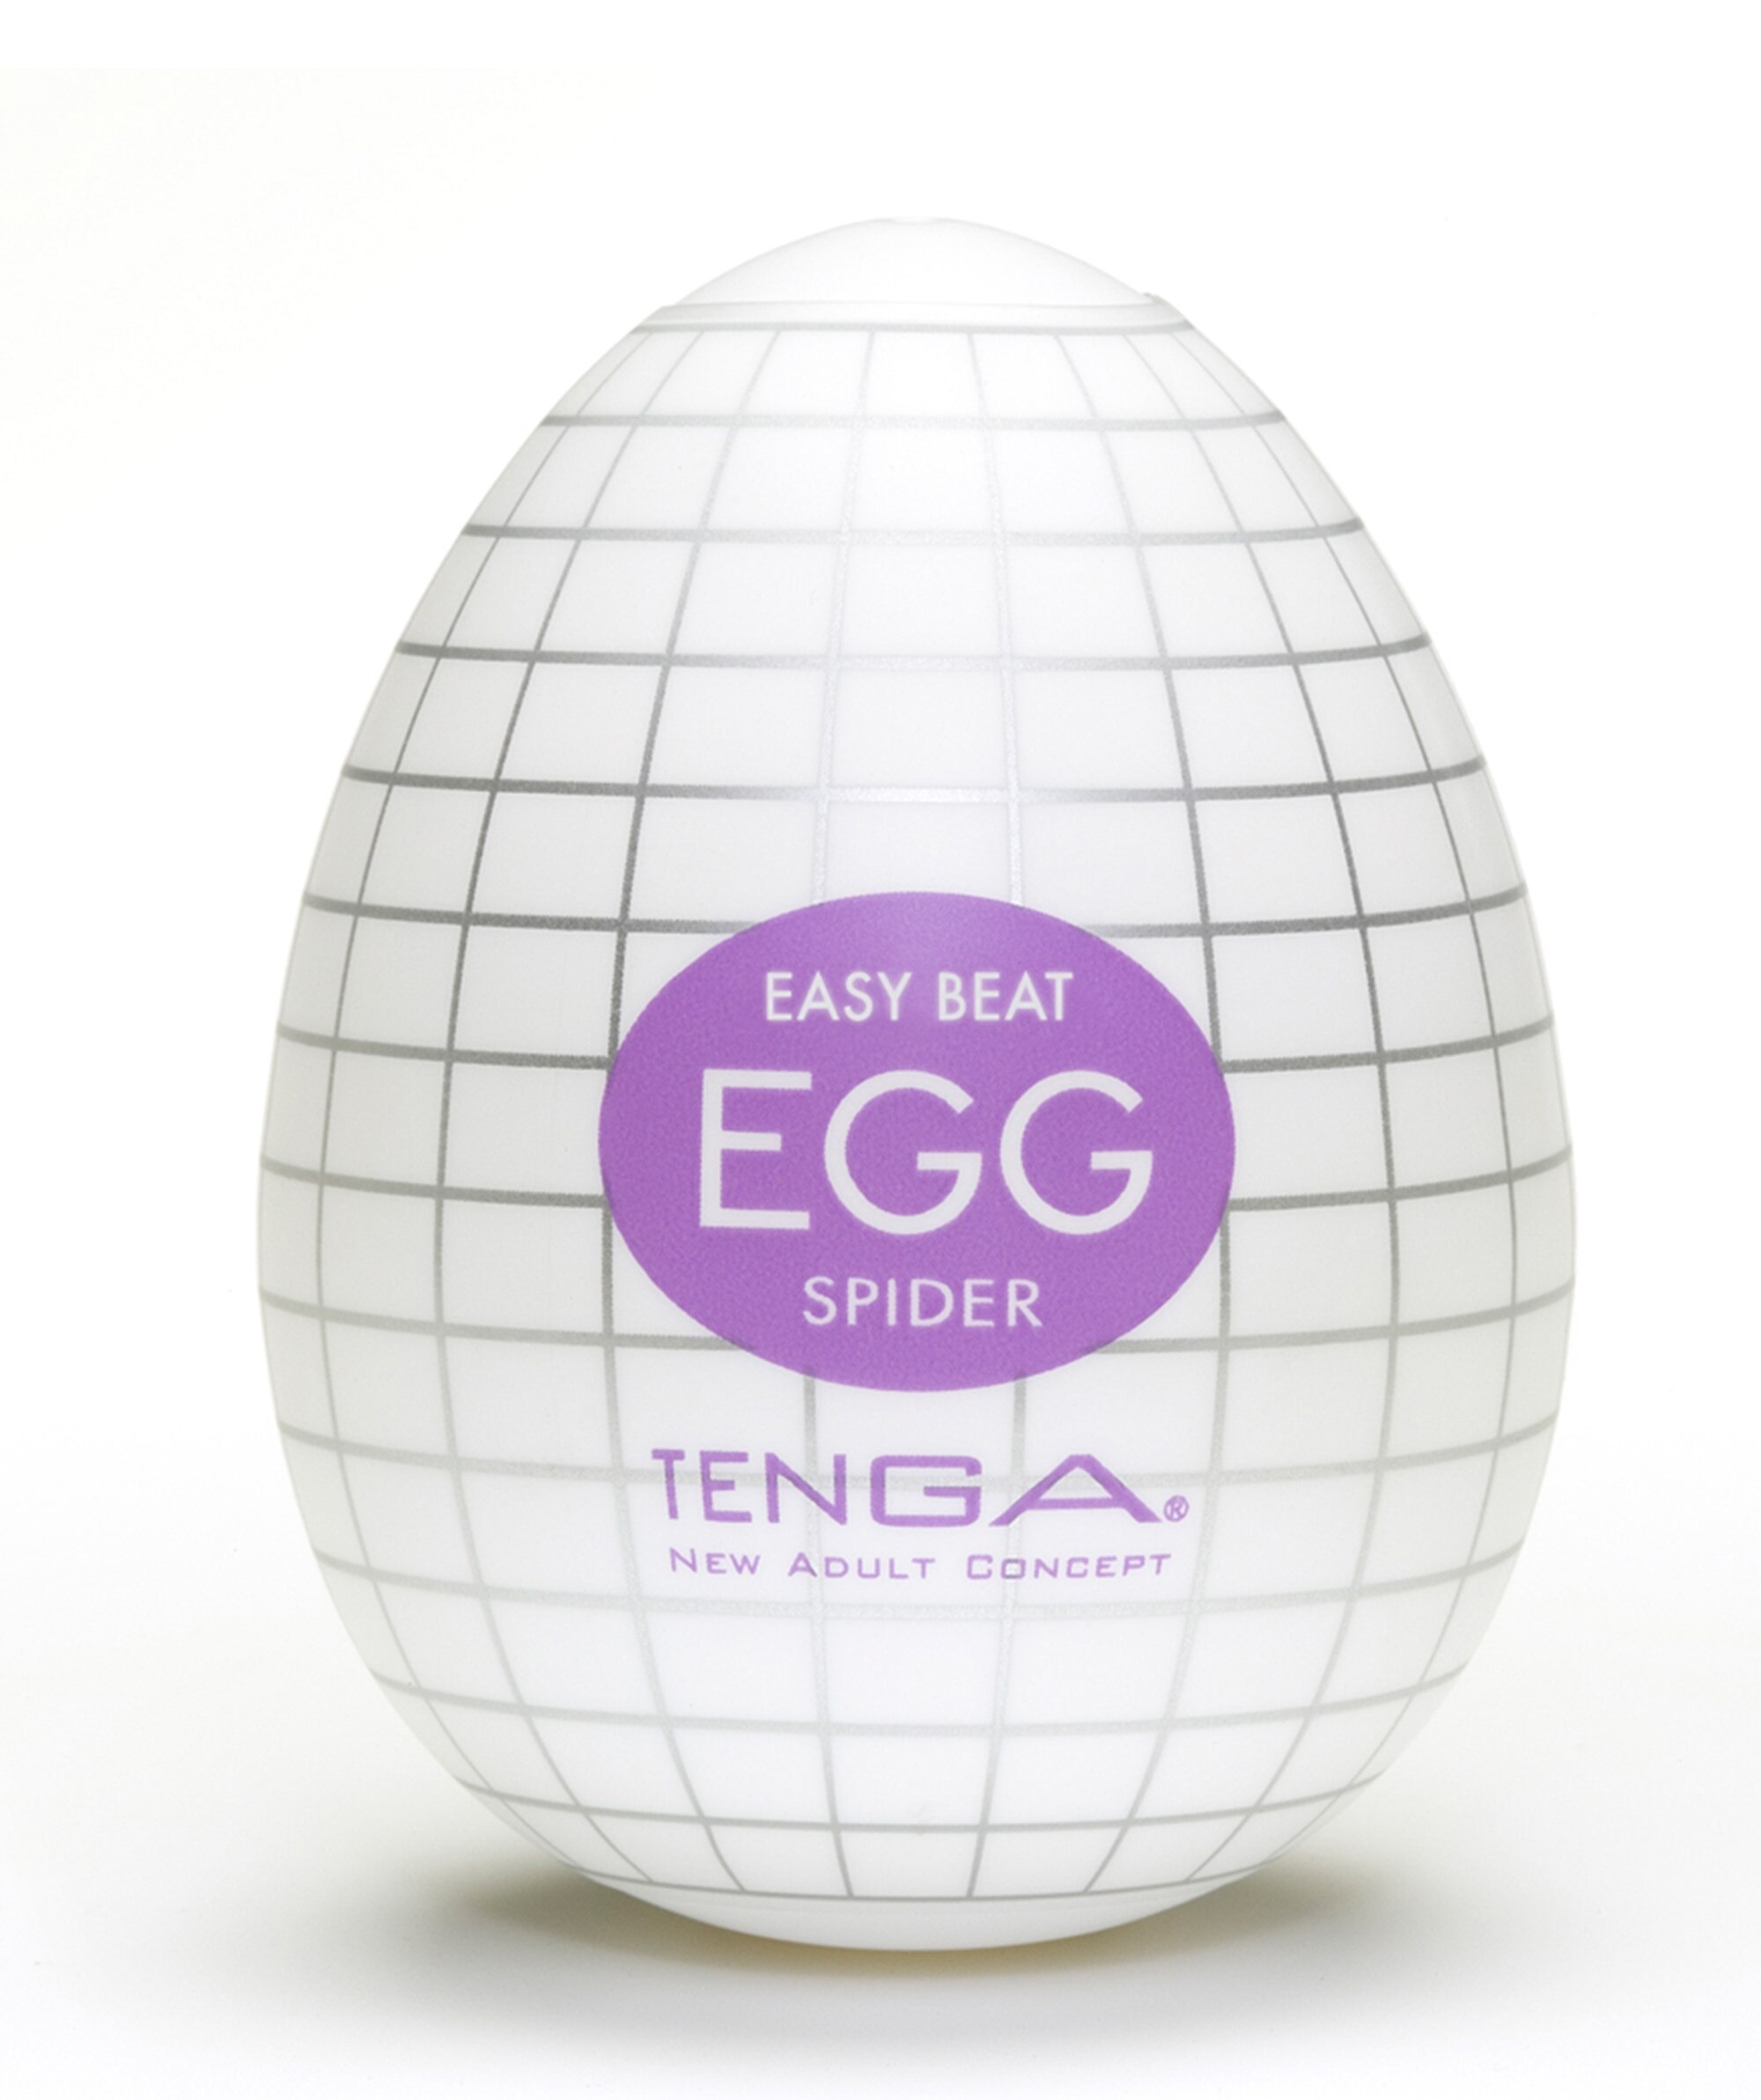 Tenga Egg Male Toy - Spider